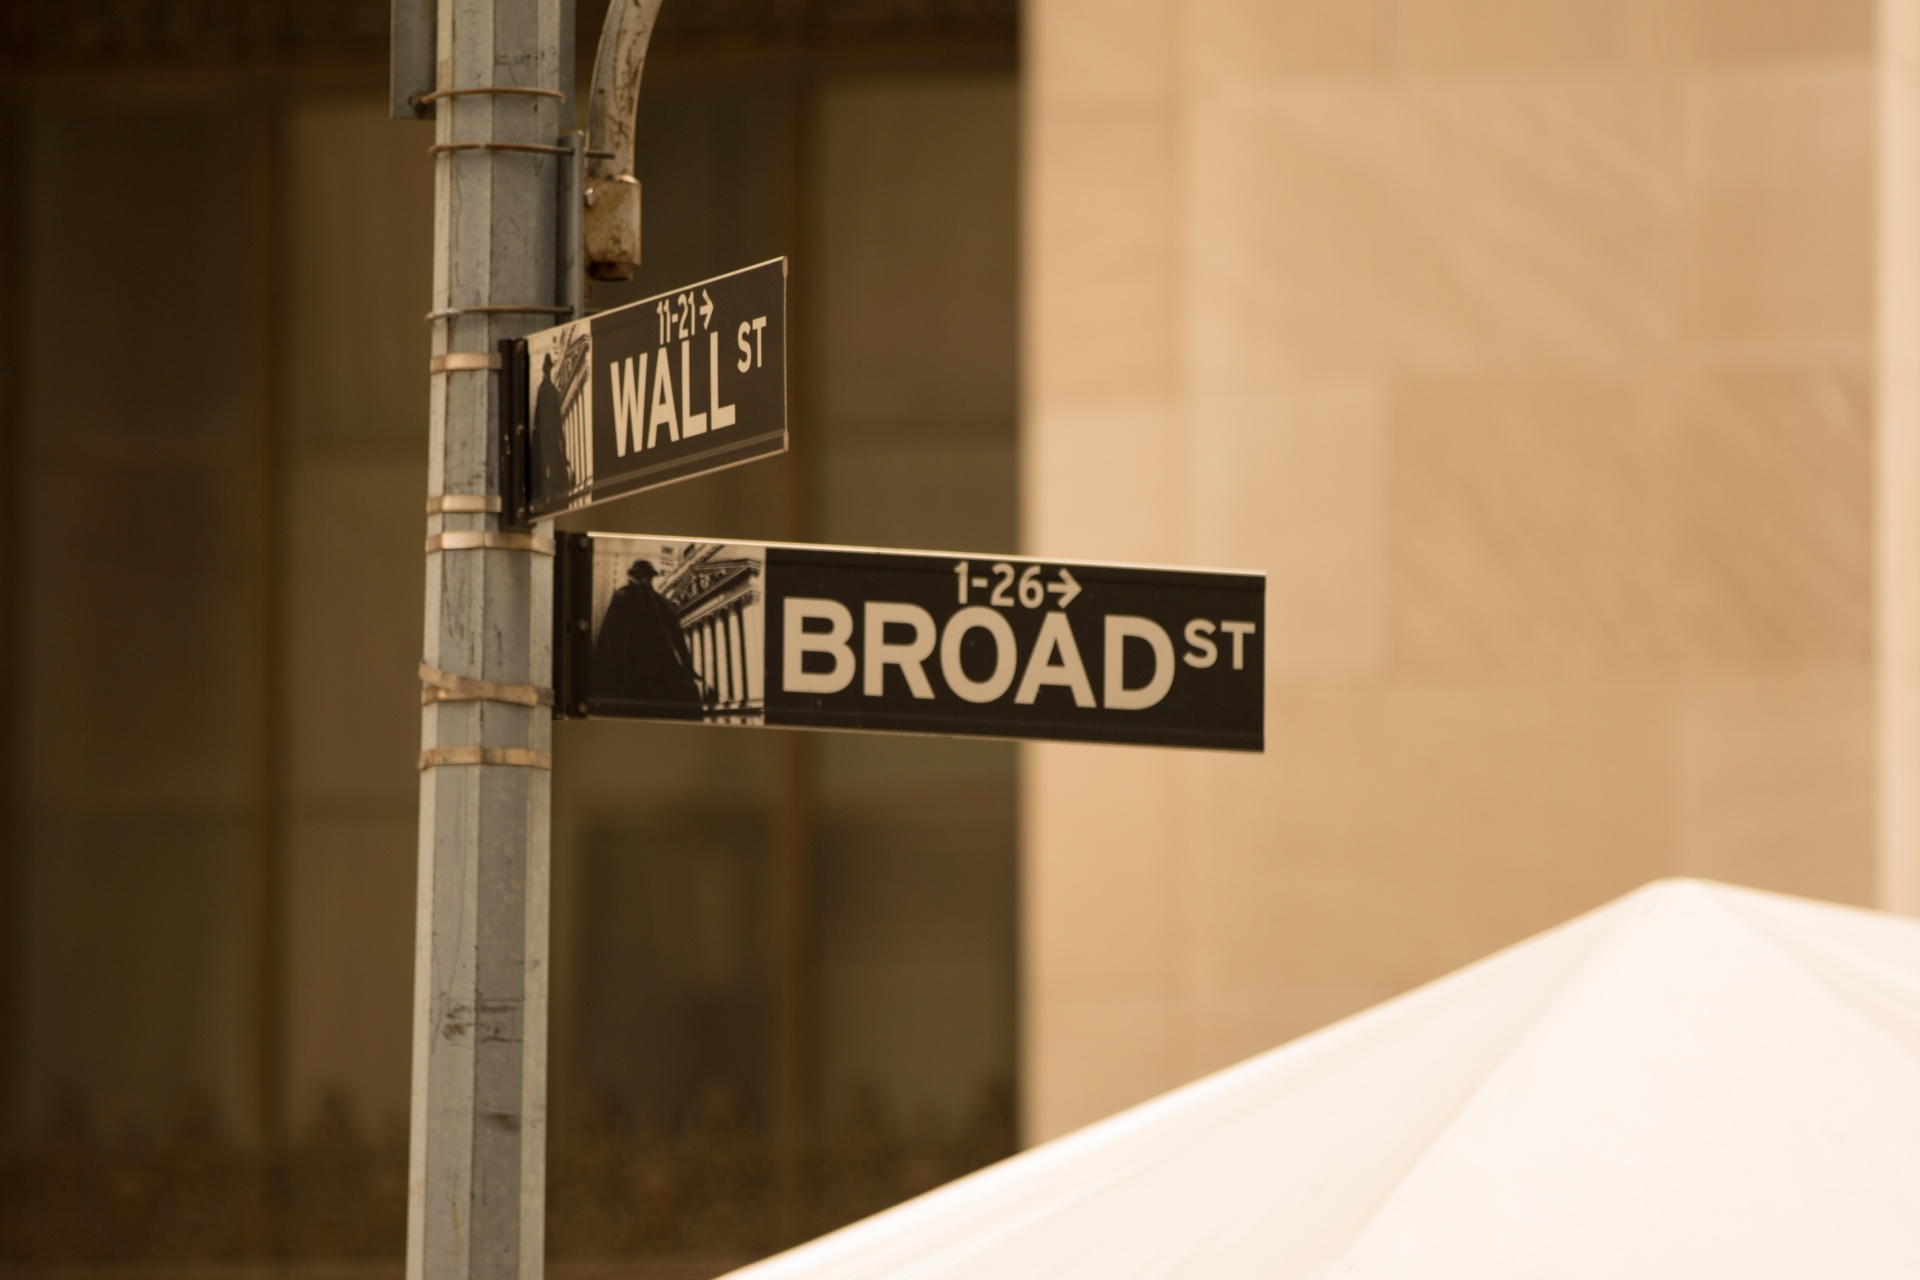 Street Sign Of Broadway